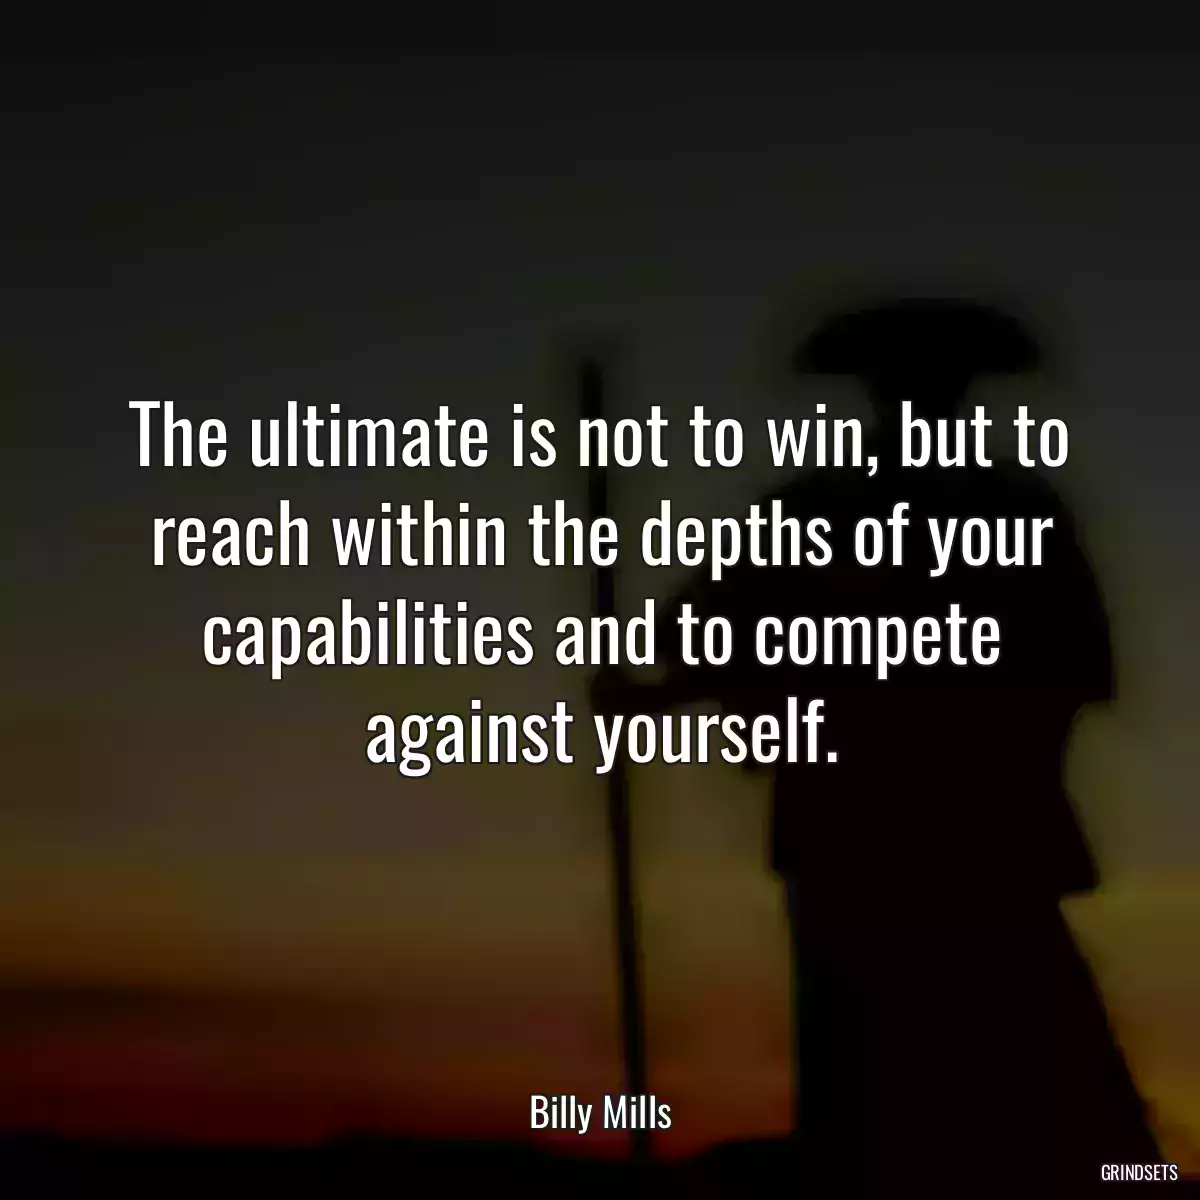 The ultimate is not to win, but to reach within the depths of your capabilities and to compete against yourself.